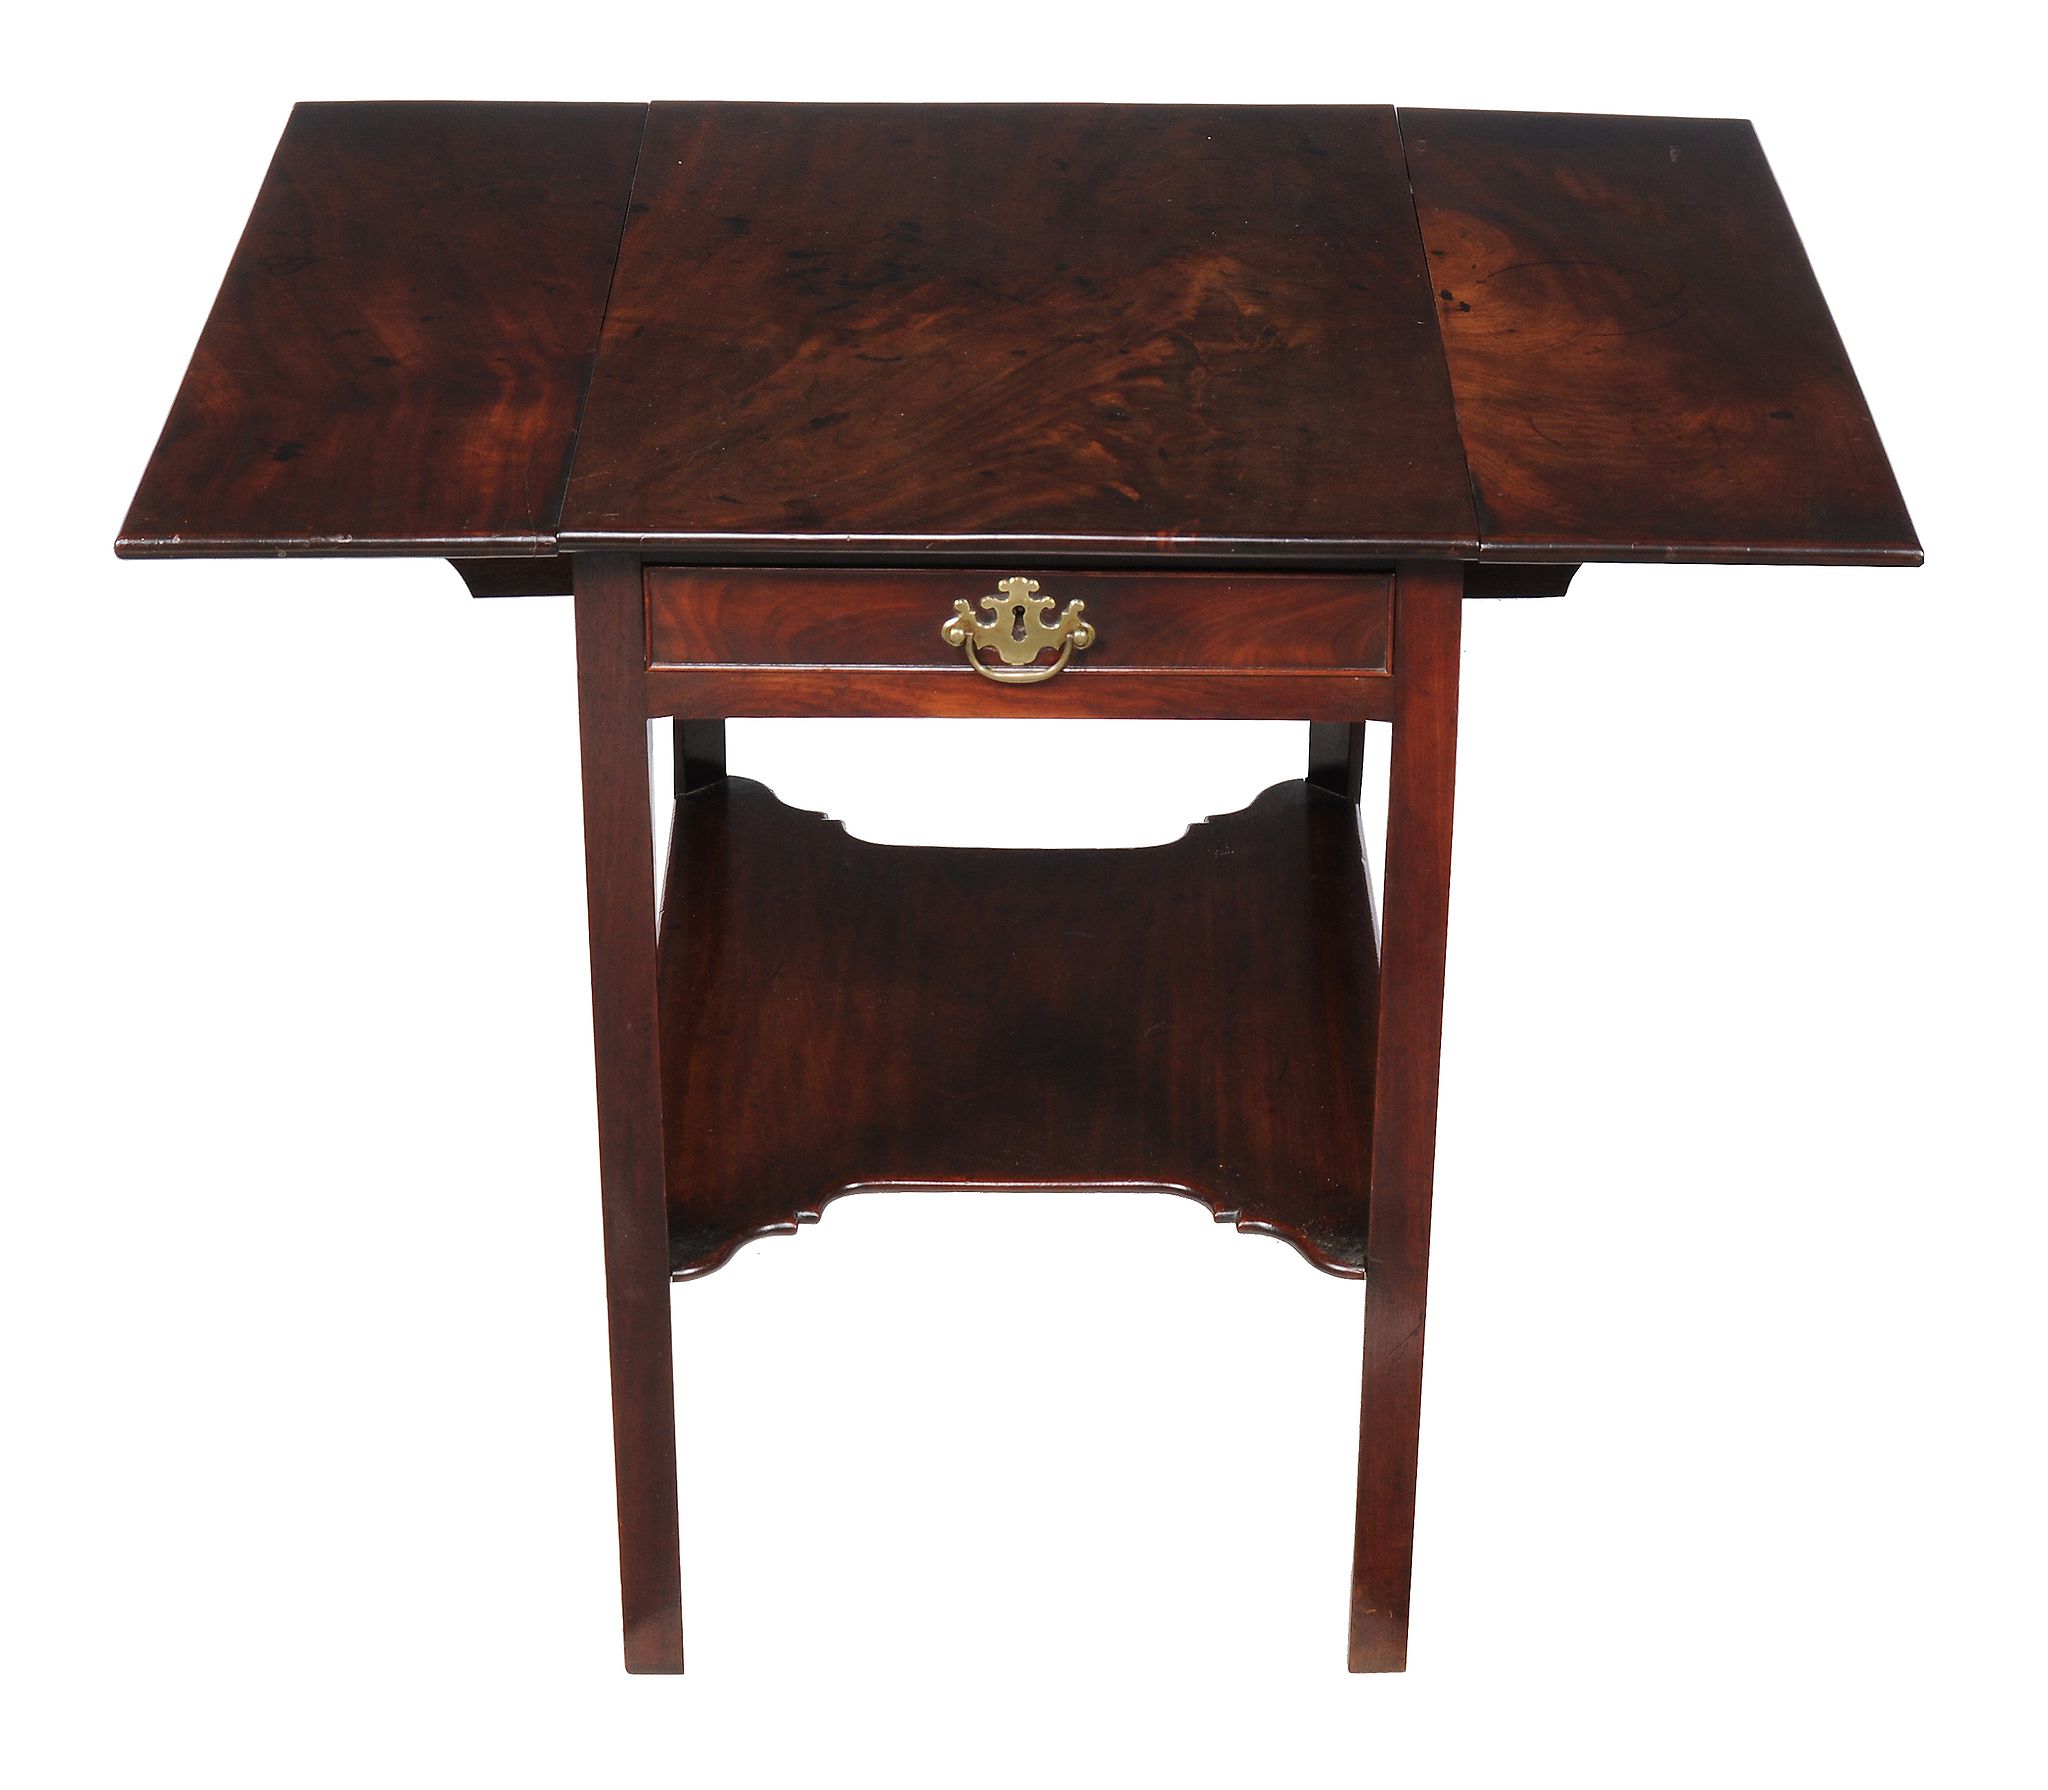 A George III mahogany Pembroke table, circa 1770, in the manner of Thomas Chippendale, the - Image 2 of 4